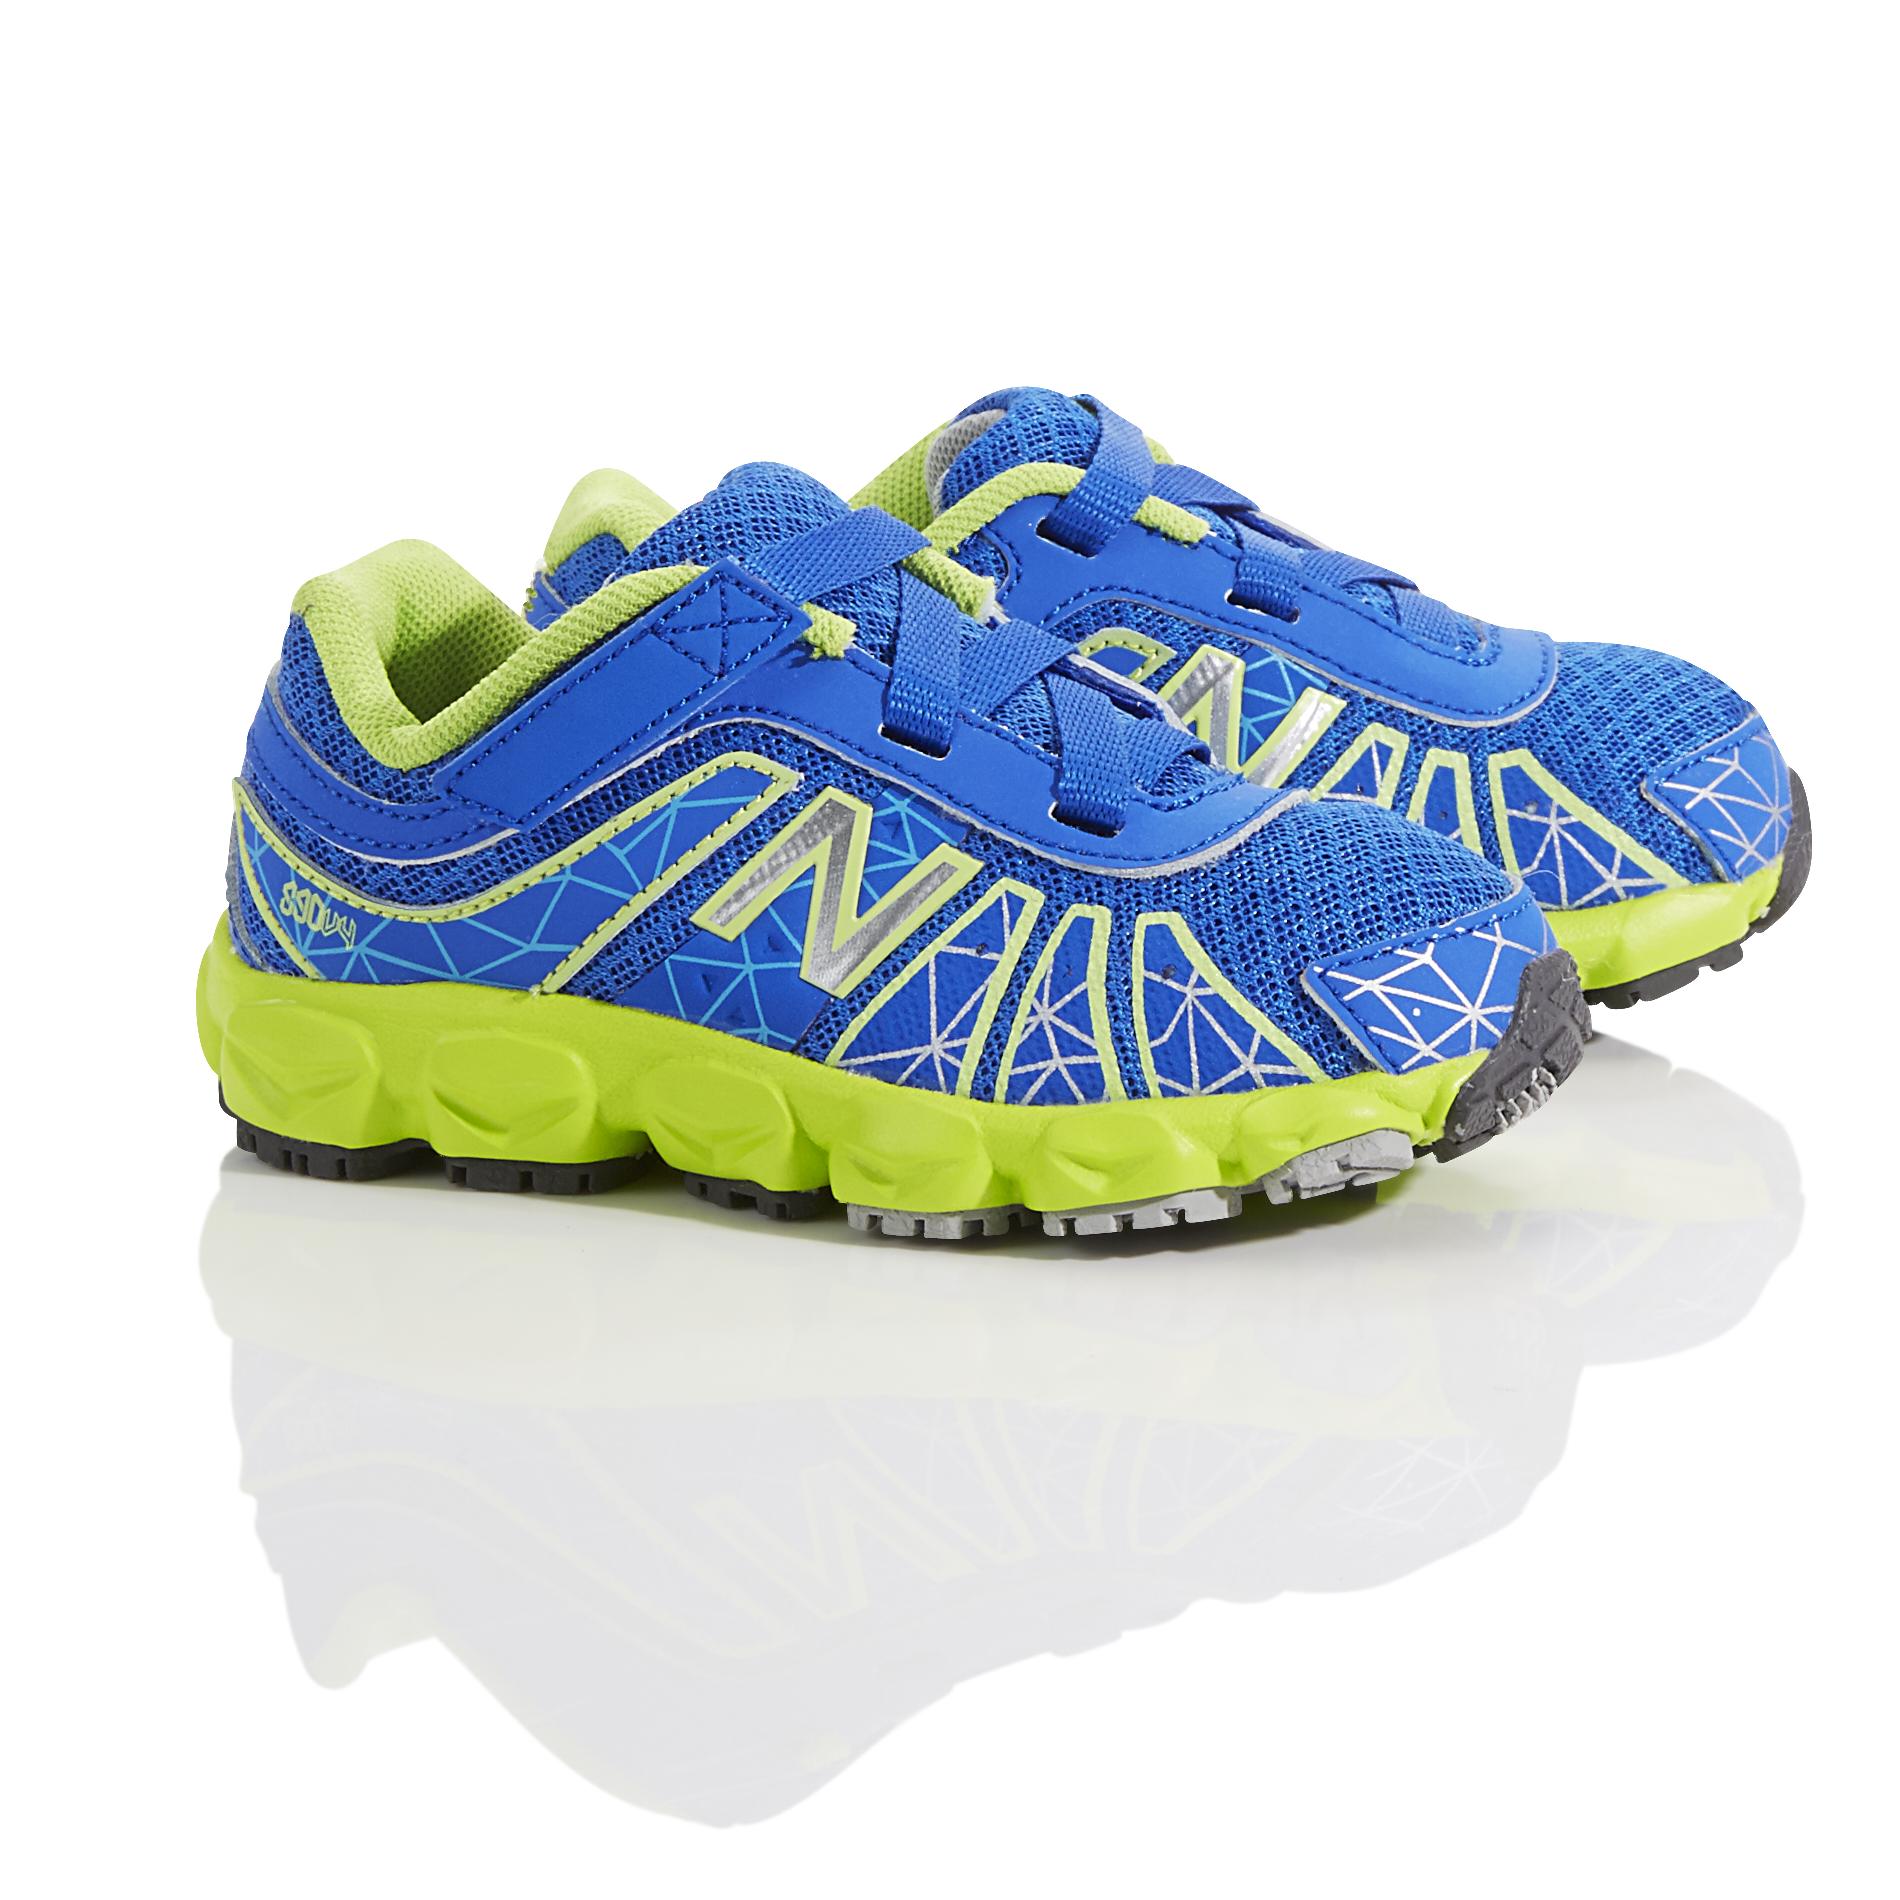 New Balance Toddler Boy's 890 Blue/Neon Green Athletic ...